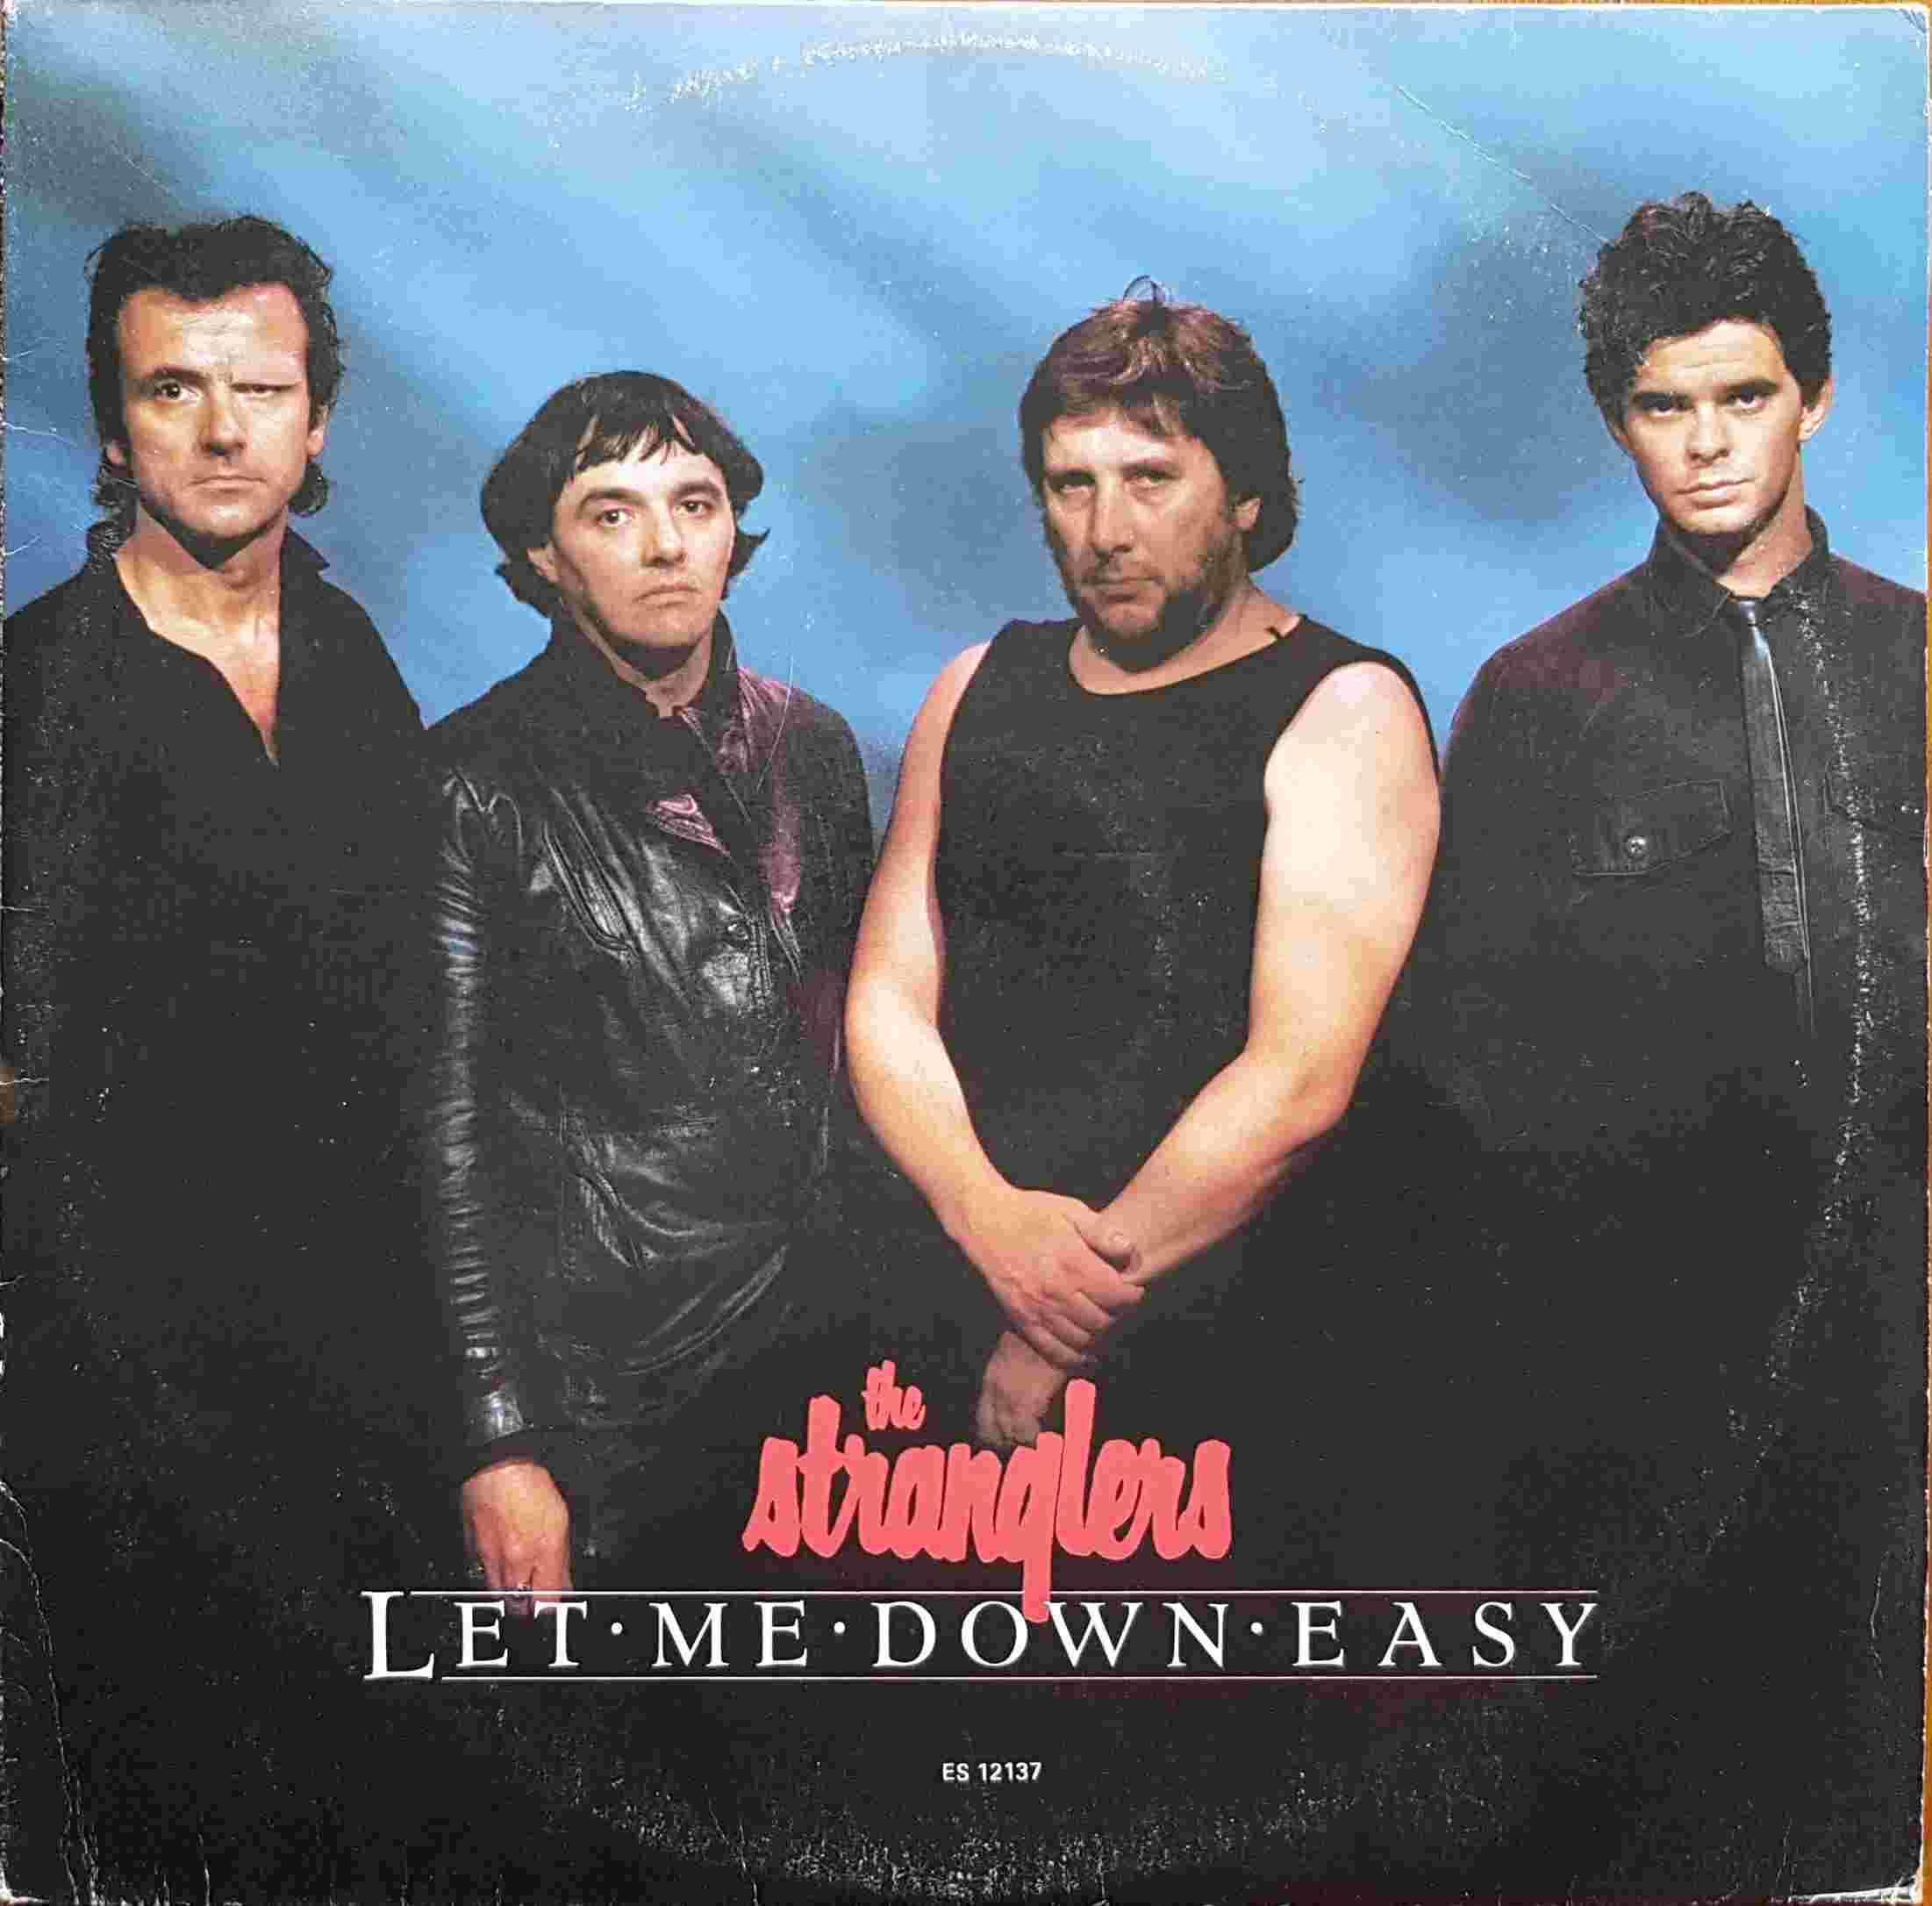 Picture of ES 12137 Let me down easy - Australian import promotional record by artist The Stranglers from The Stranglers 12inches